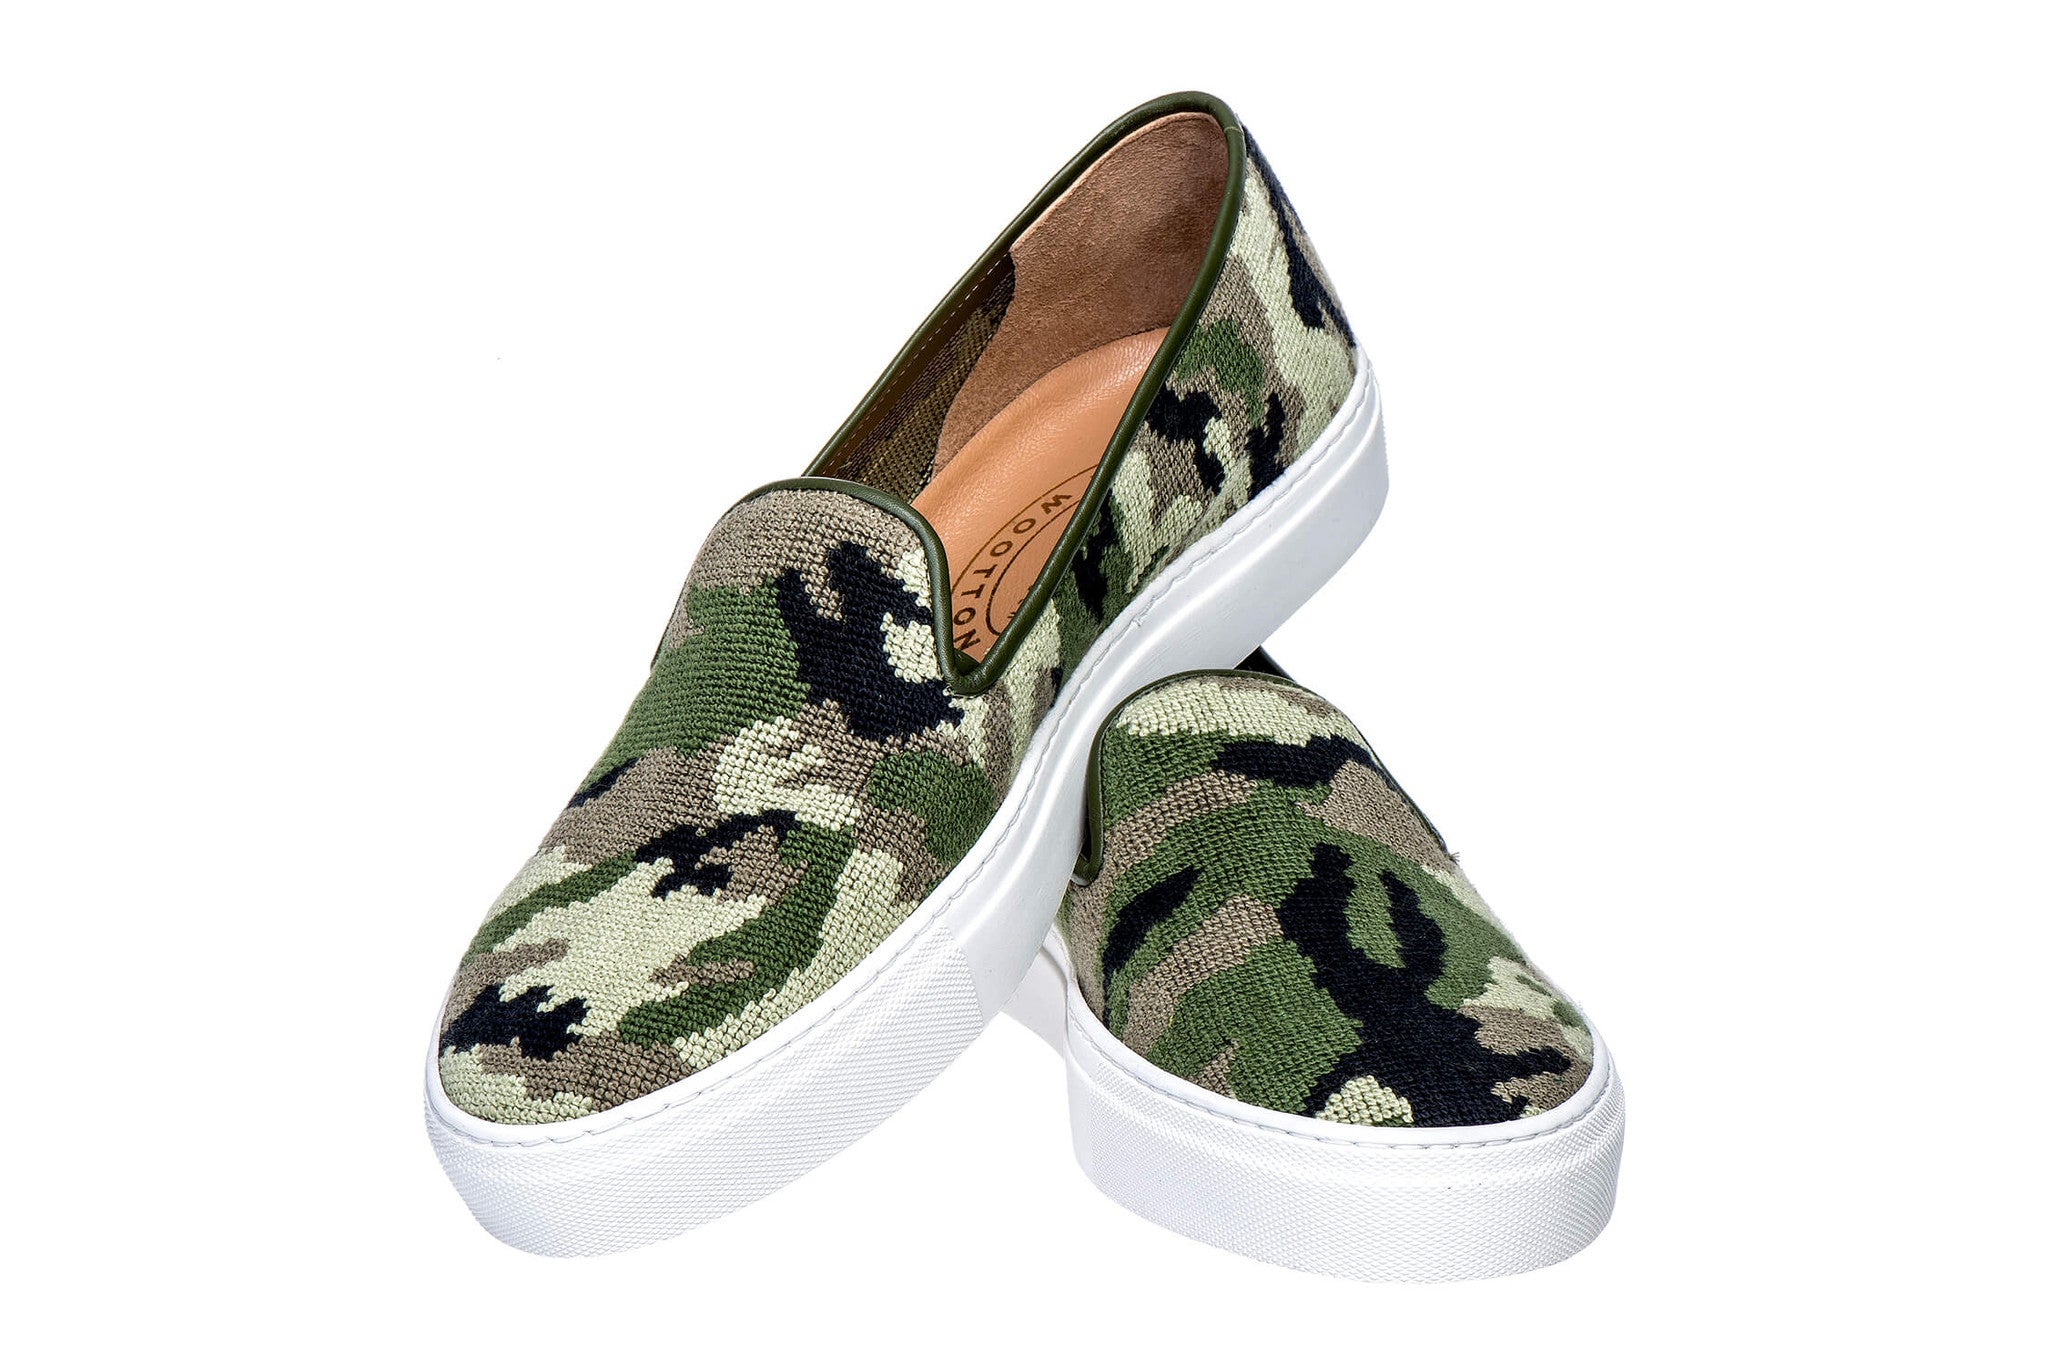 womens camouflage sneakers